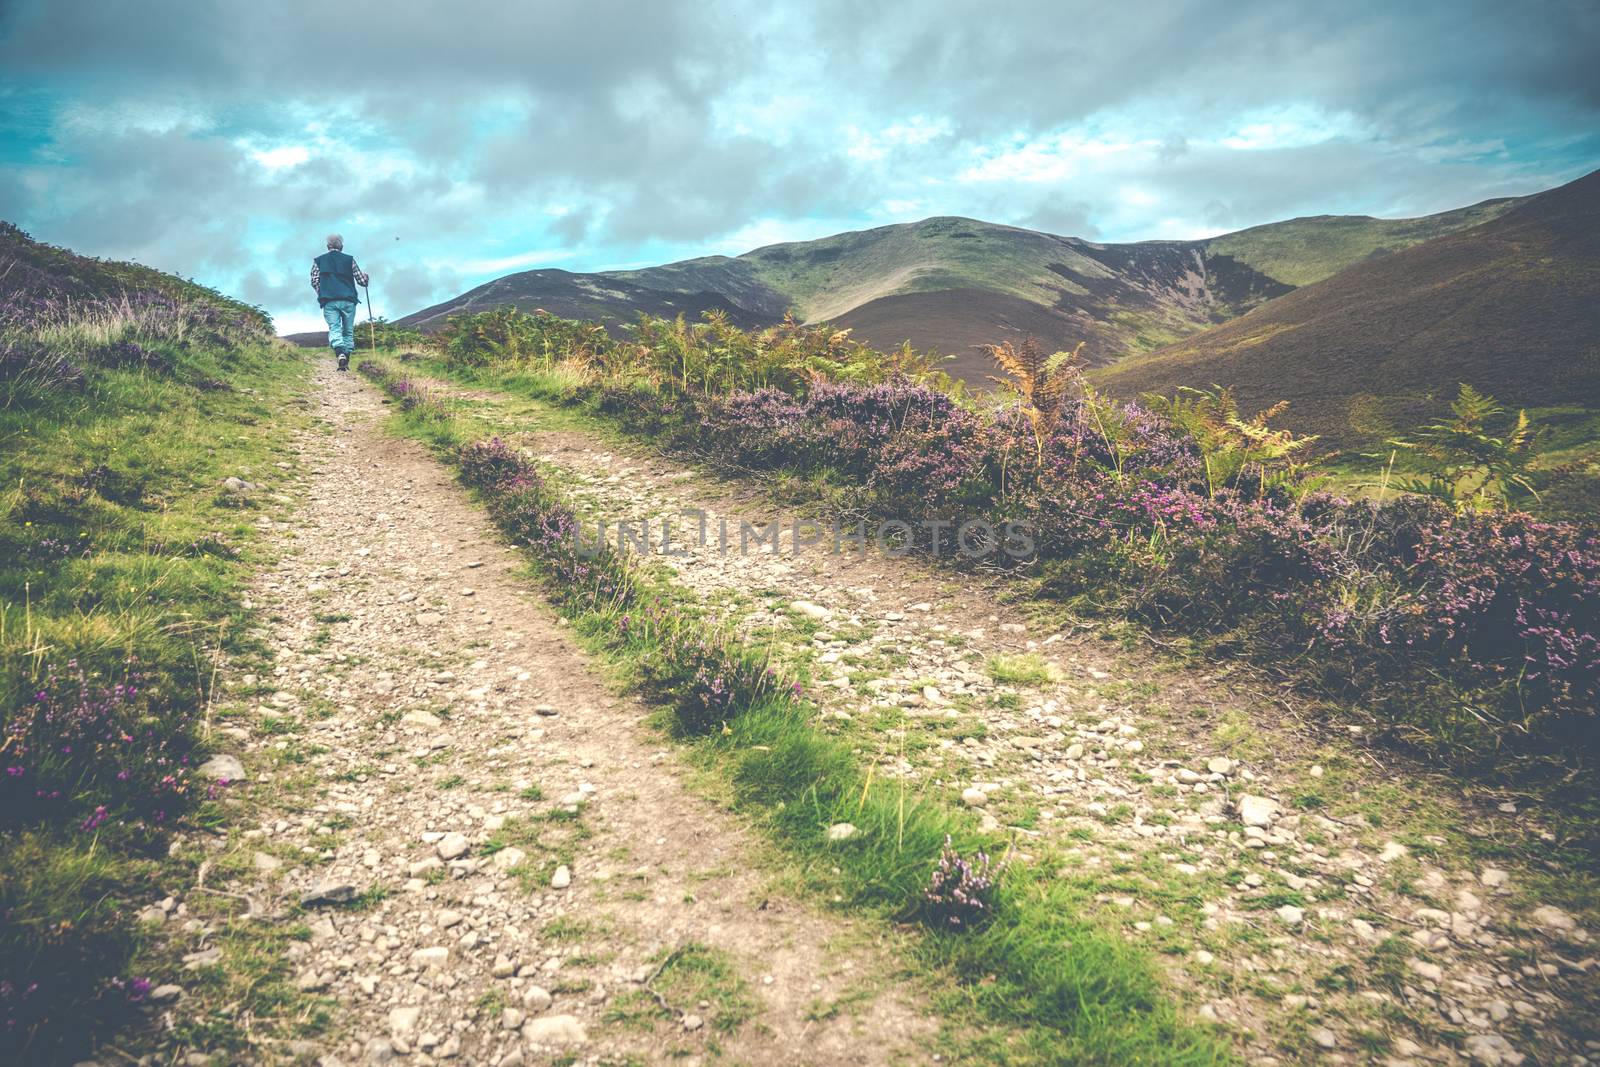 Vintage Style Image Of A Senior Man Hiking In The Scottish Countryside